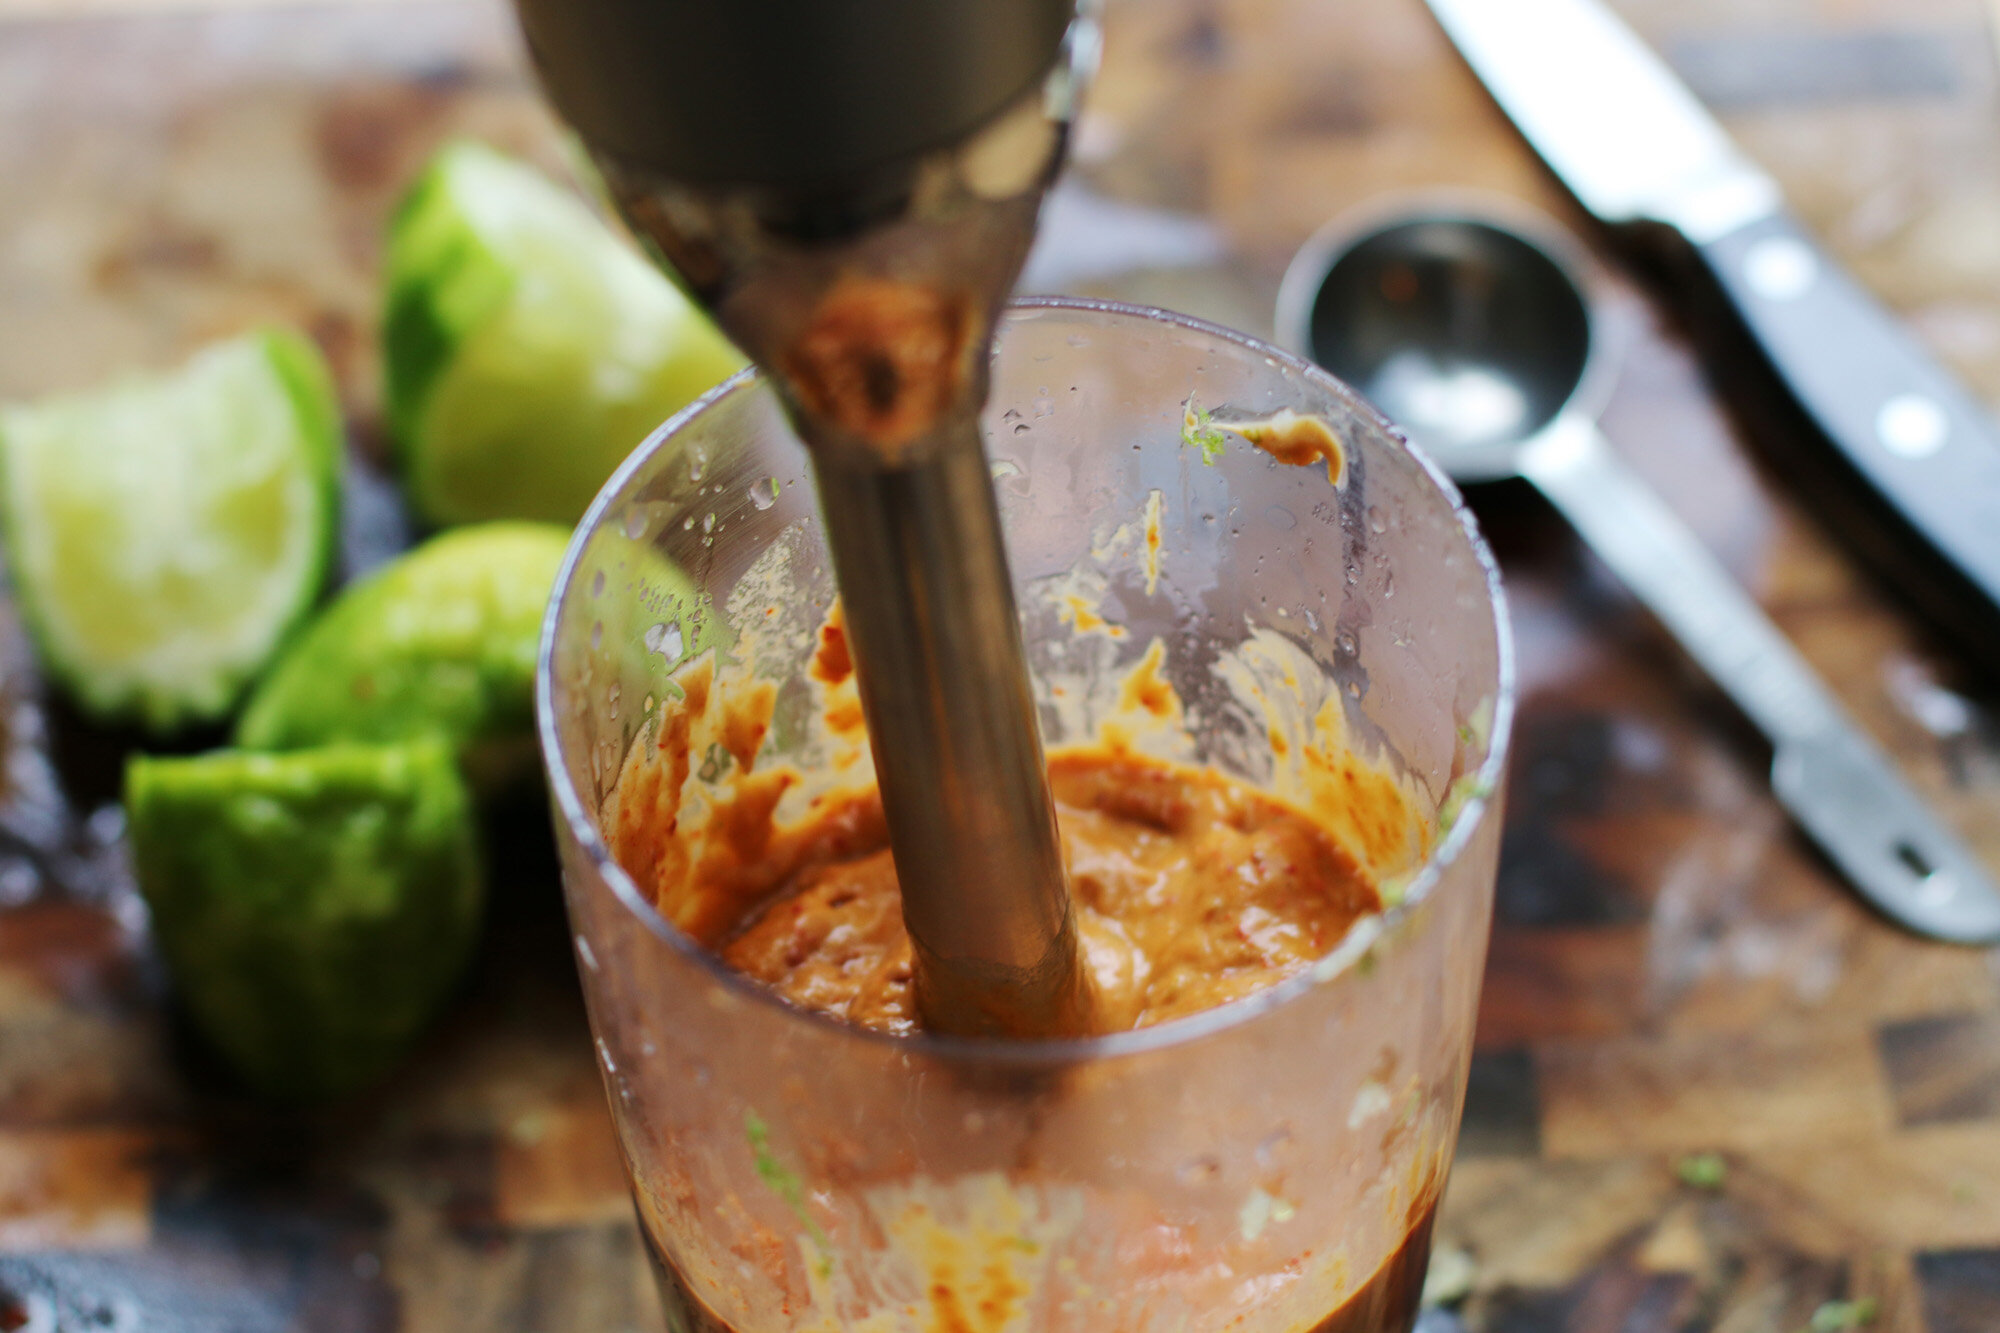  Carefully use an immersion blender to mix everything together. Add more water for a thinner consistency. 